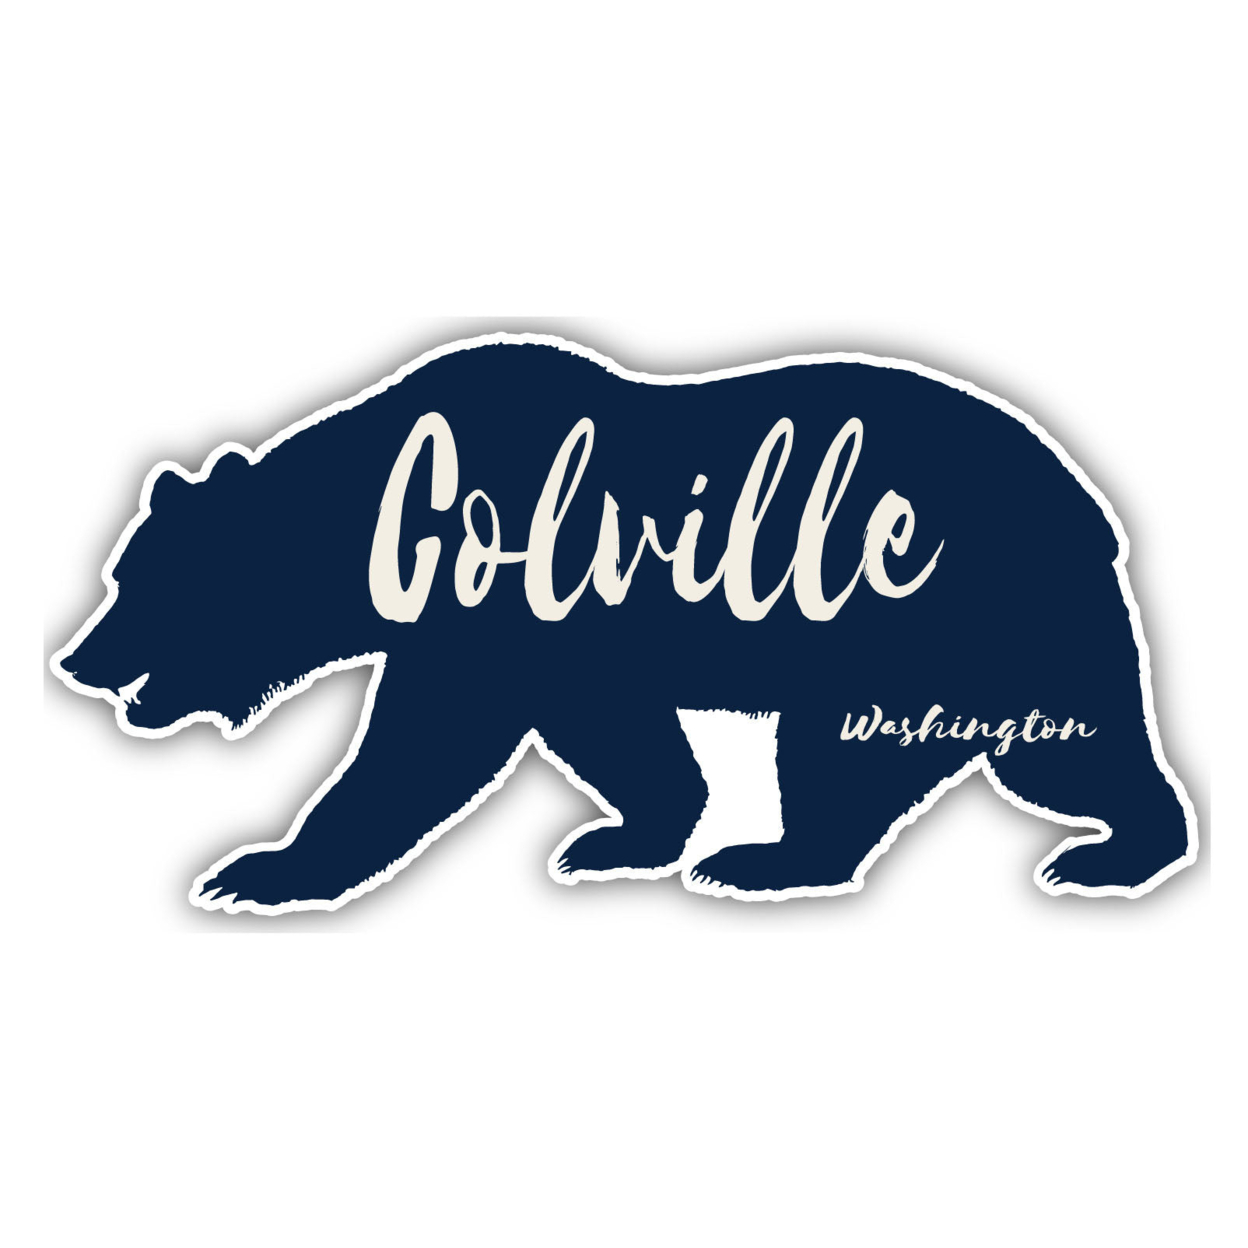 Colville Washington Souvenir Decorative Stickers (Choose Theme And Size) - 4-Pack, 4-Inch, Great Outdoors